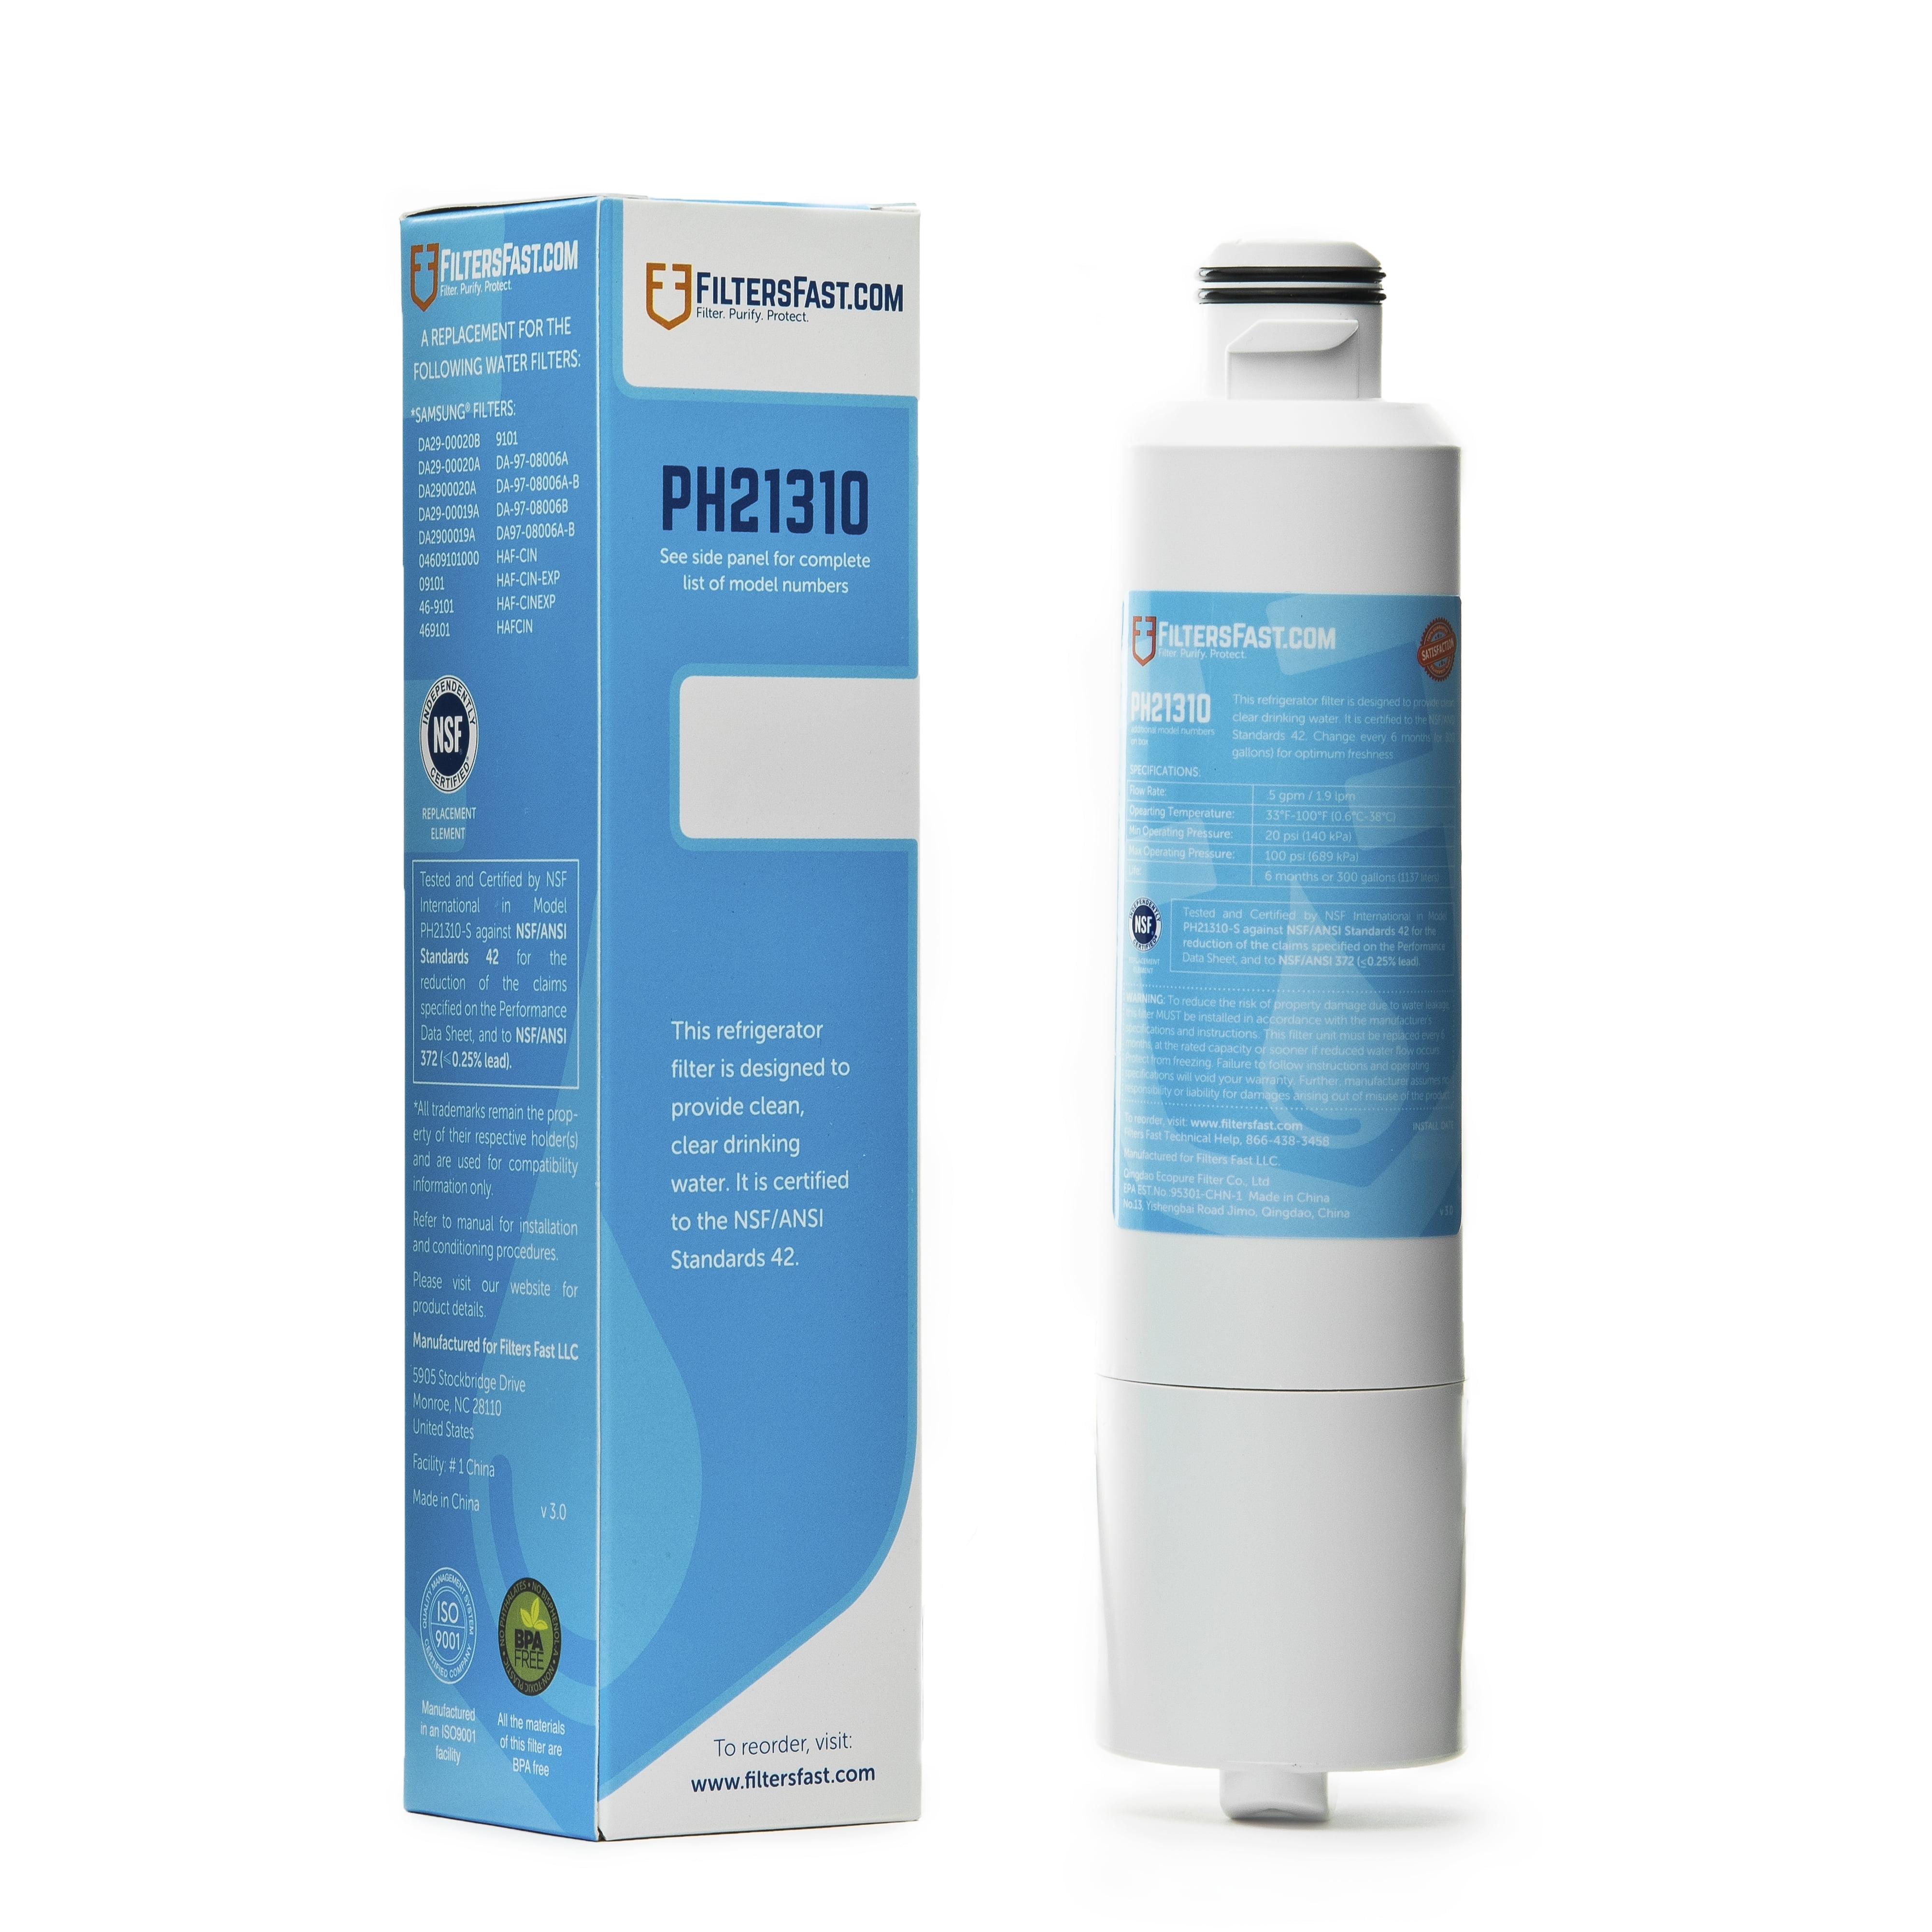 PureH2O Refrigerator Water Filter PH21310 - Replacement for Samsung  DA29-00020B